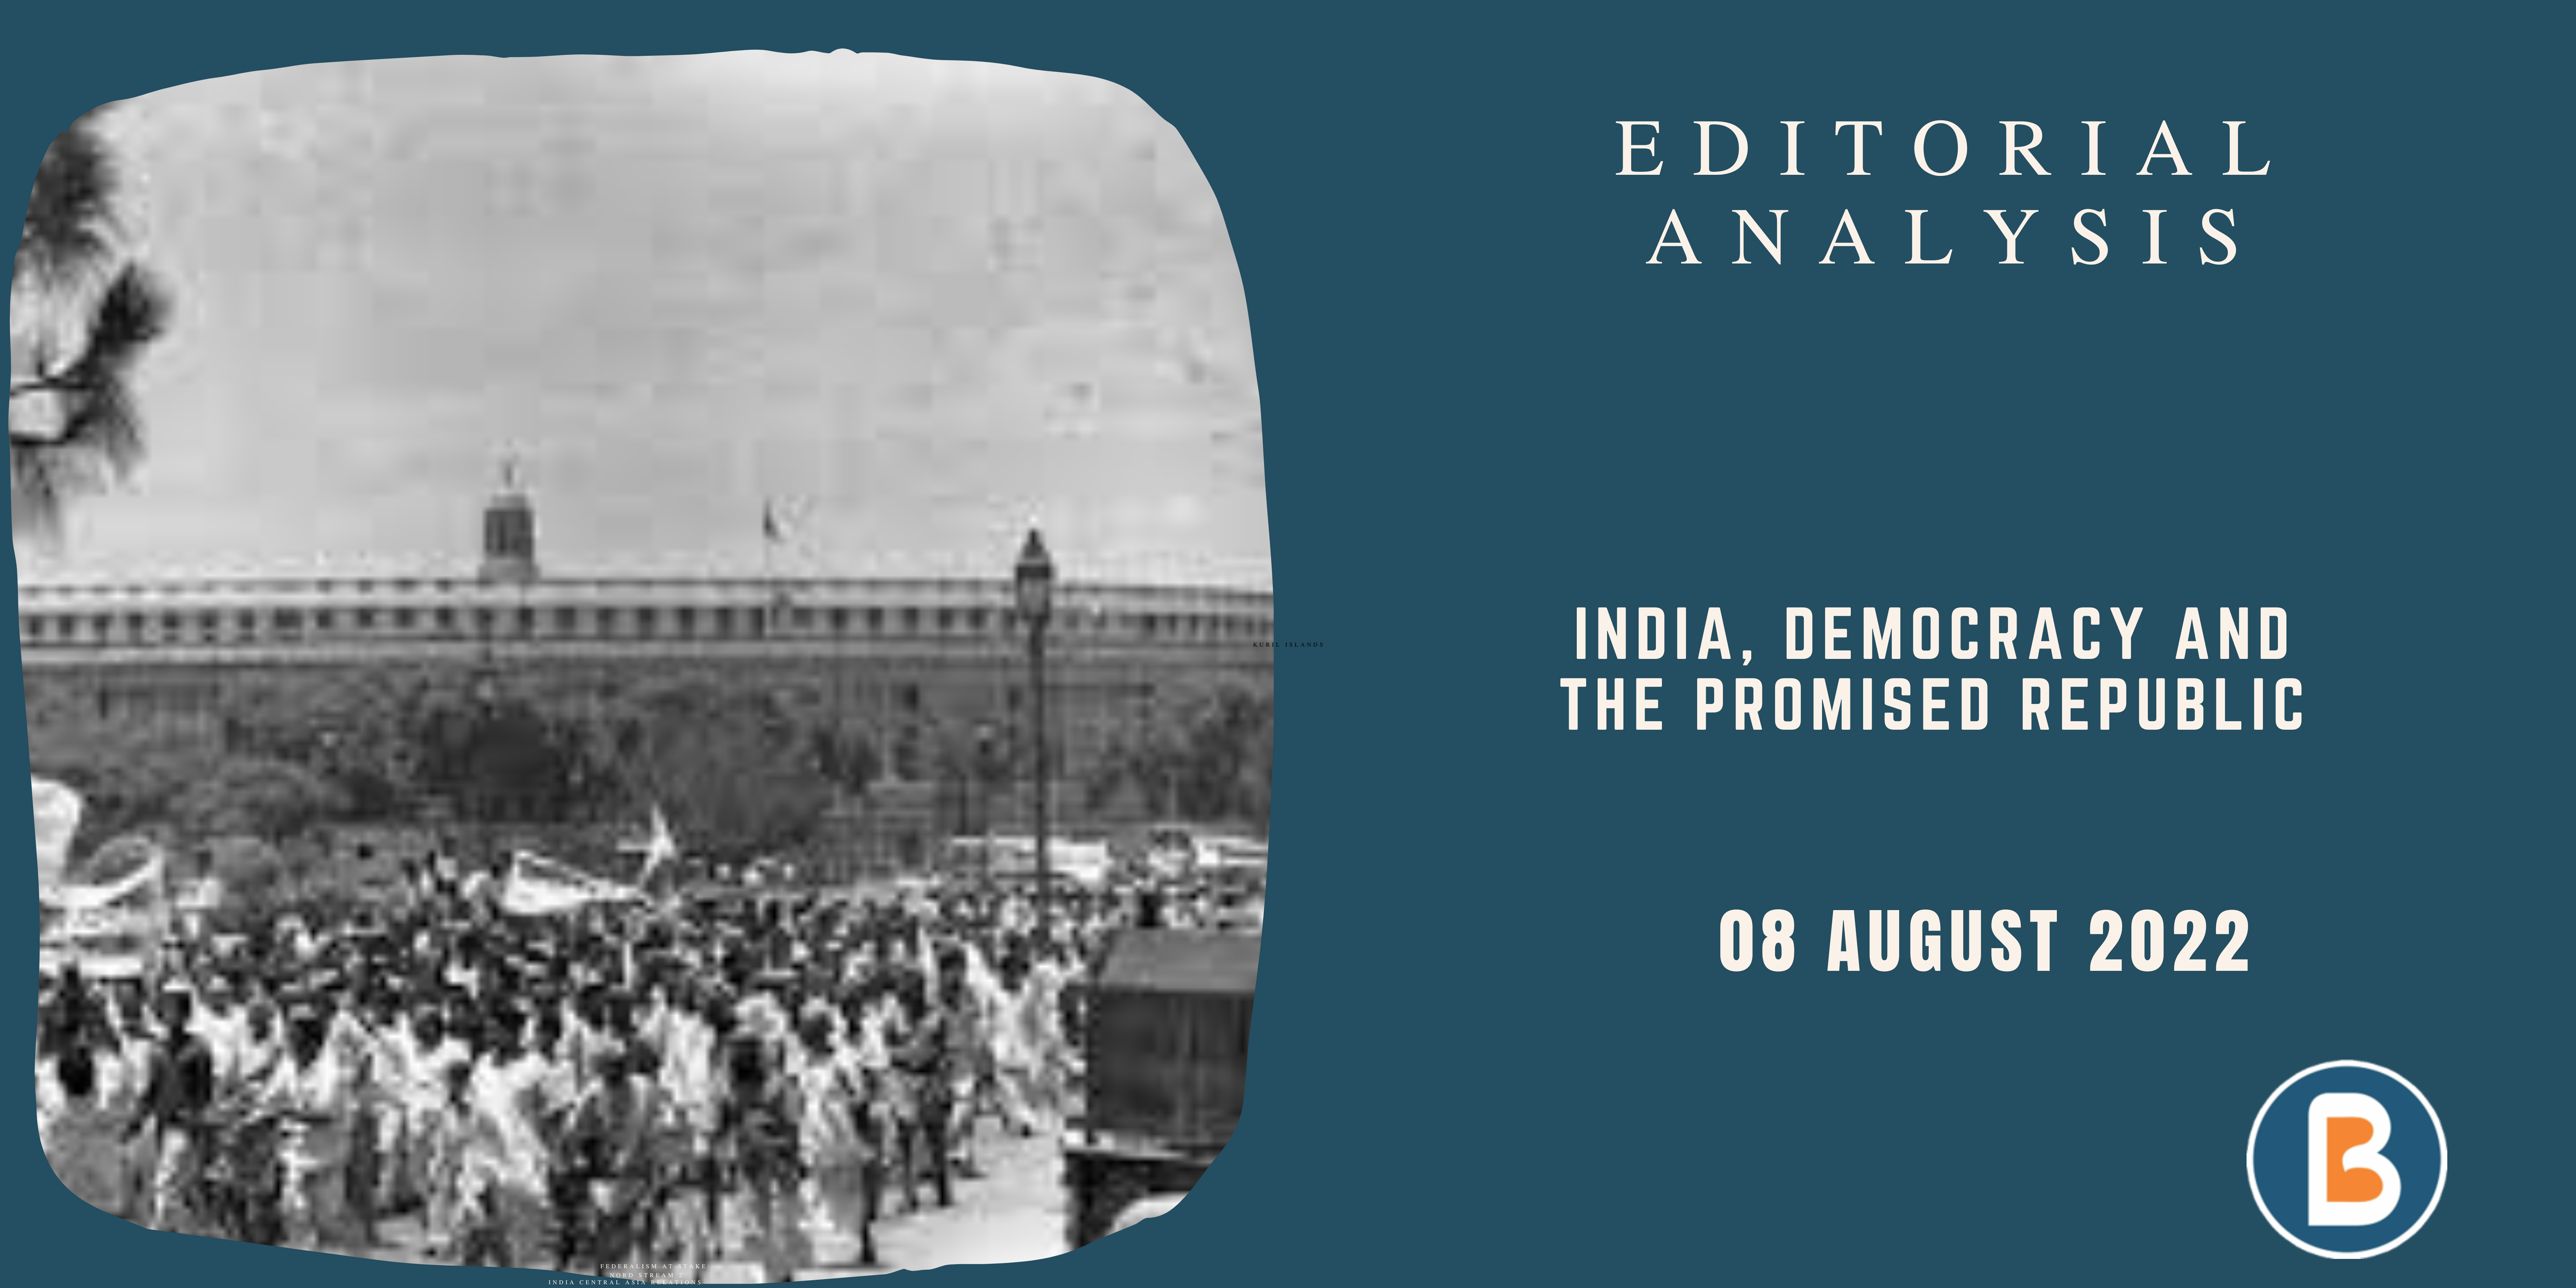 India, Democracy and the Promised Republic